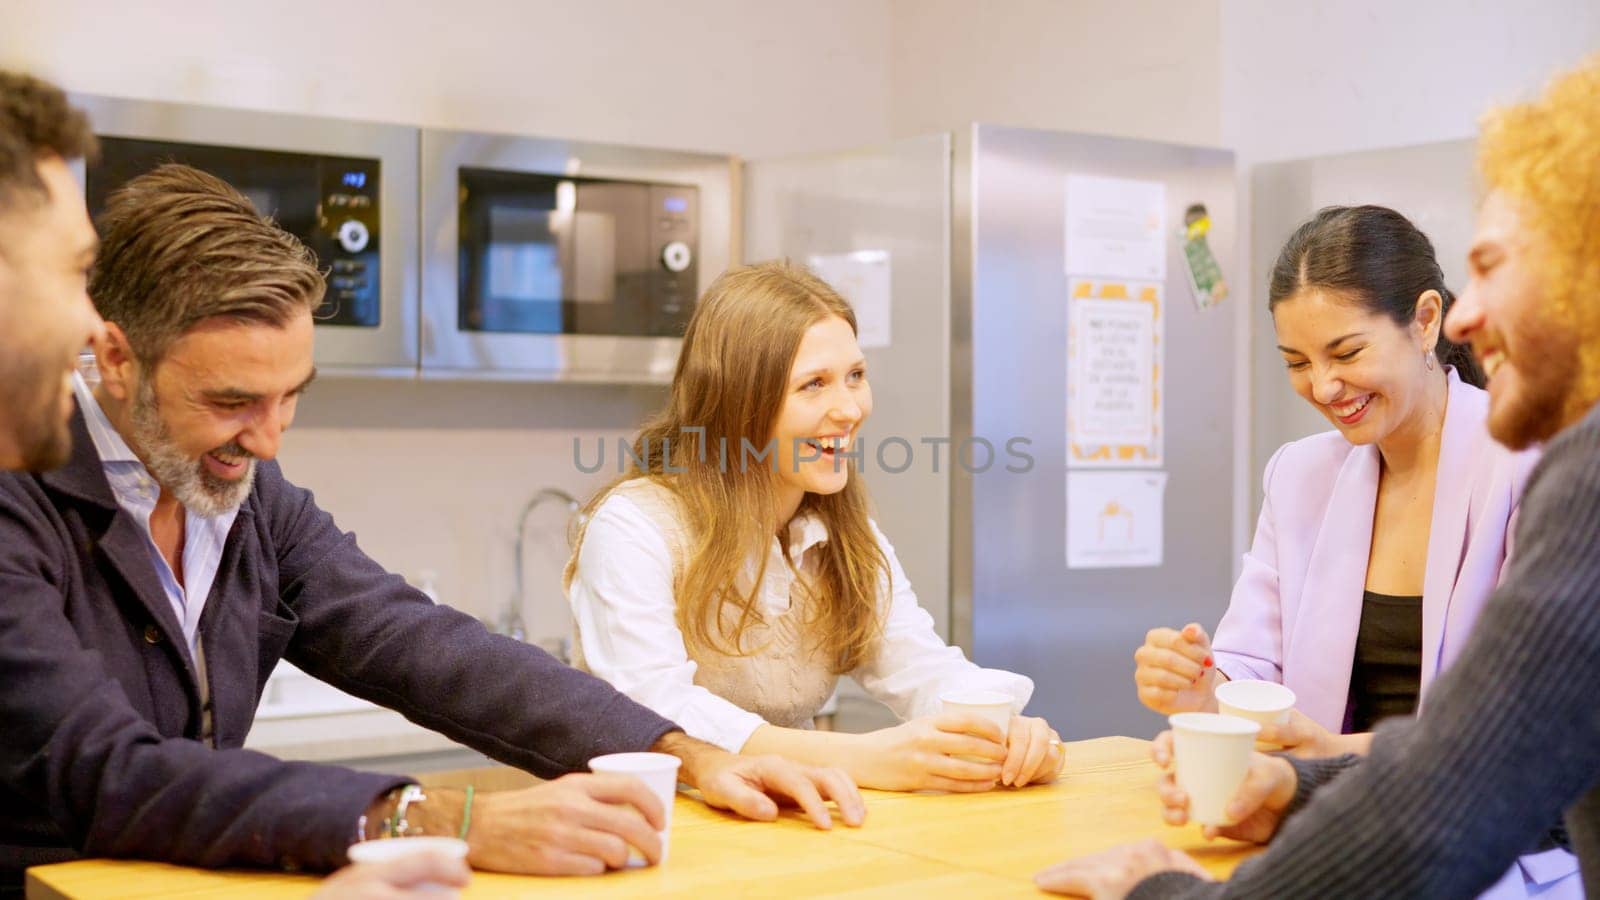 Coworkers laughing while drinking coffee during break in the office